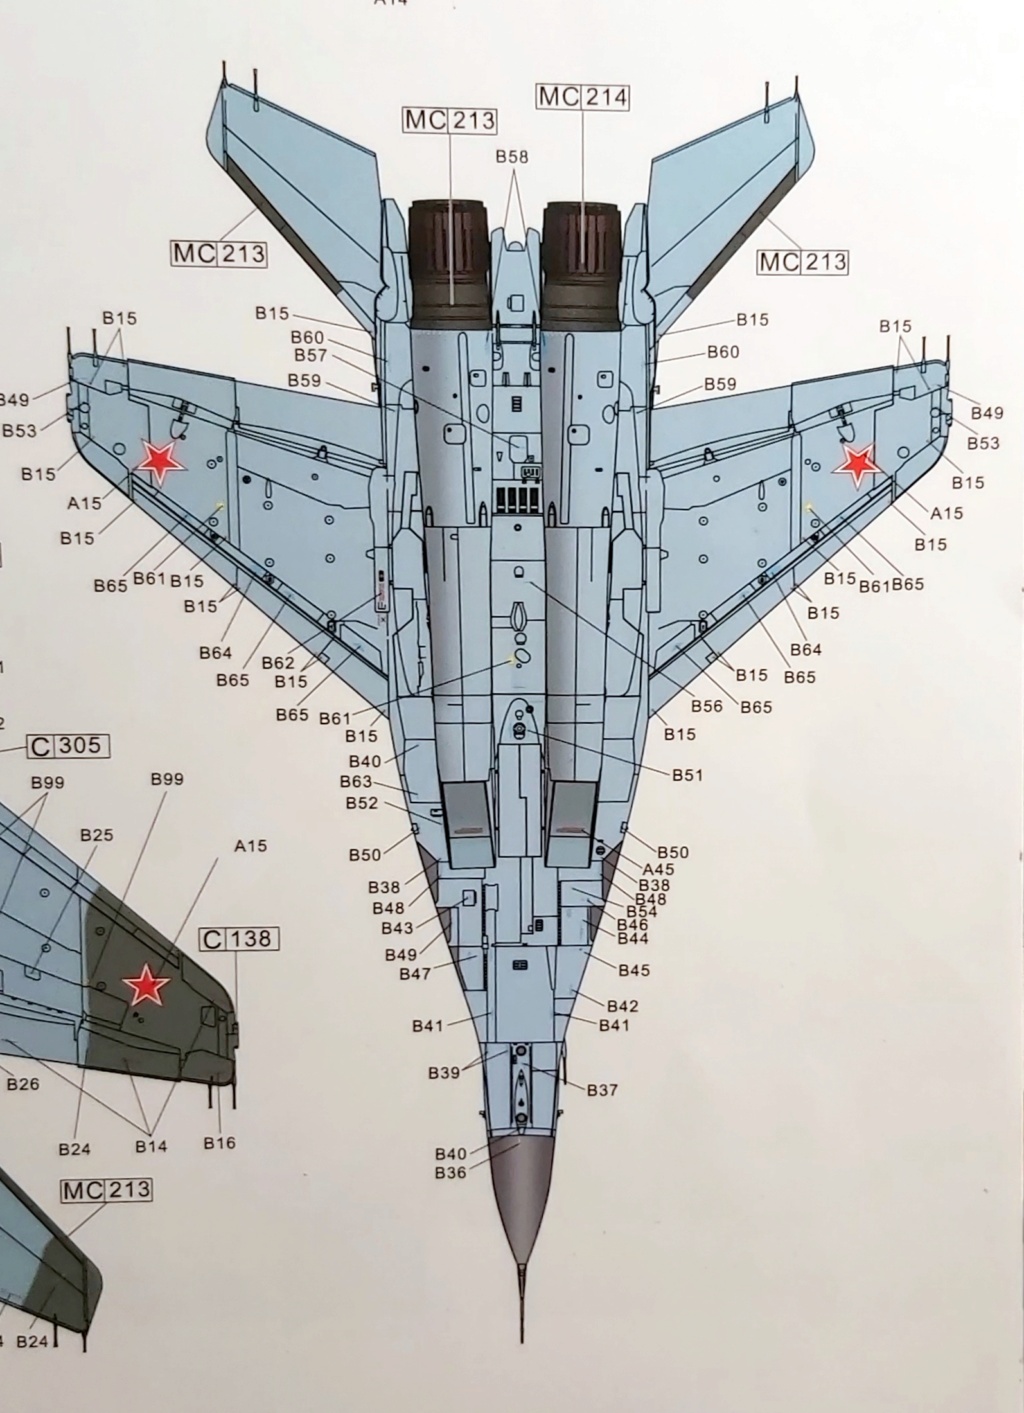 [Great Wall Hobby] 1/48 - Mikoyan-Gourevitch Mig-29 9-12 Fulcrum (A) JG3 LSK/LV DDR (RDA)  - Page 2 20230192